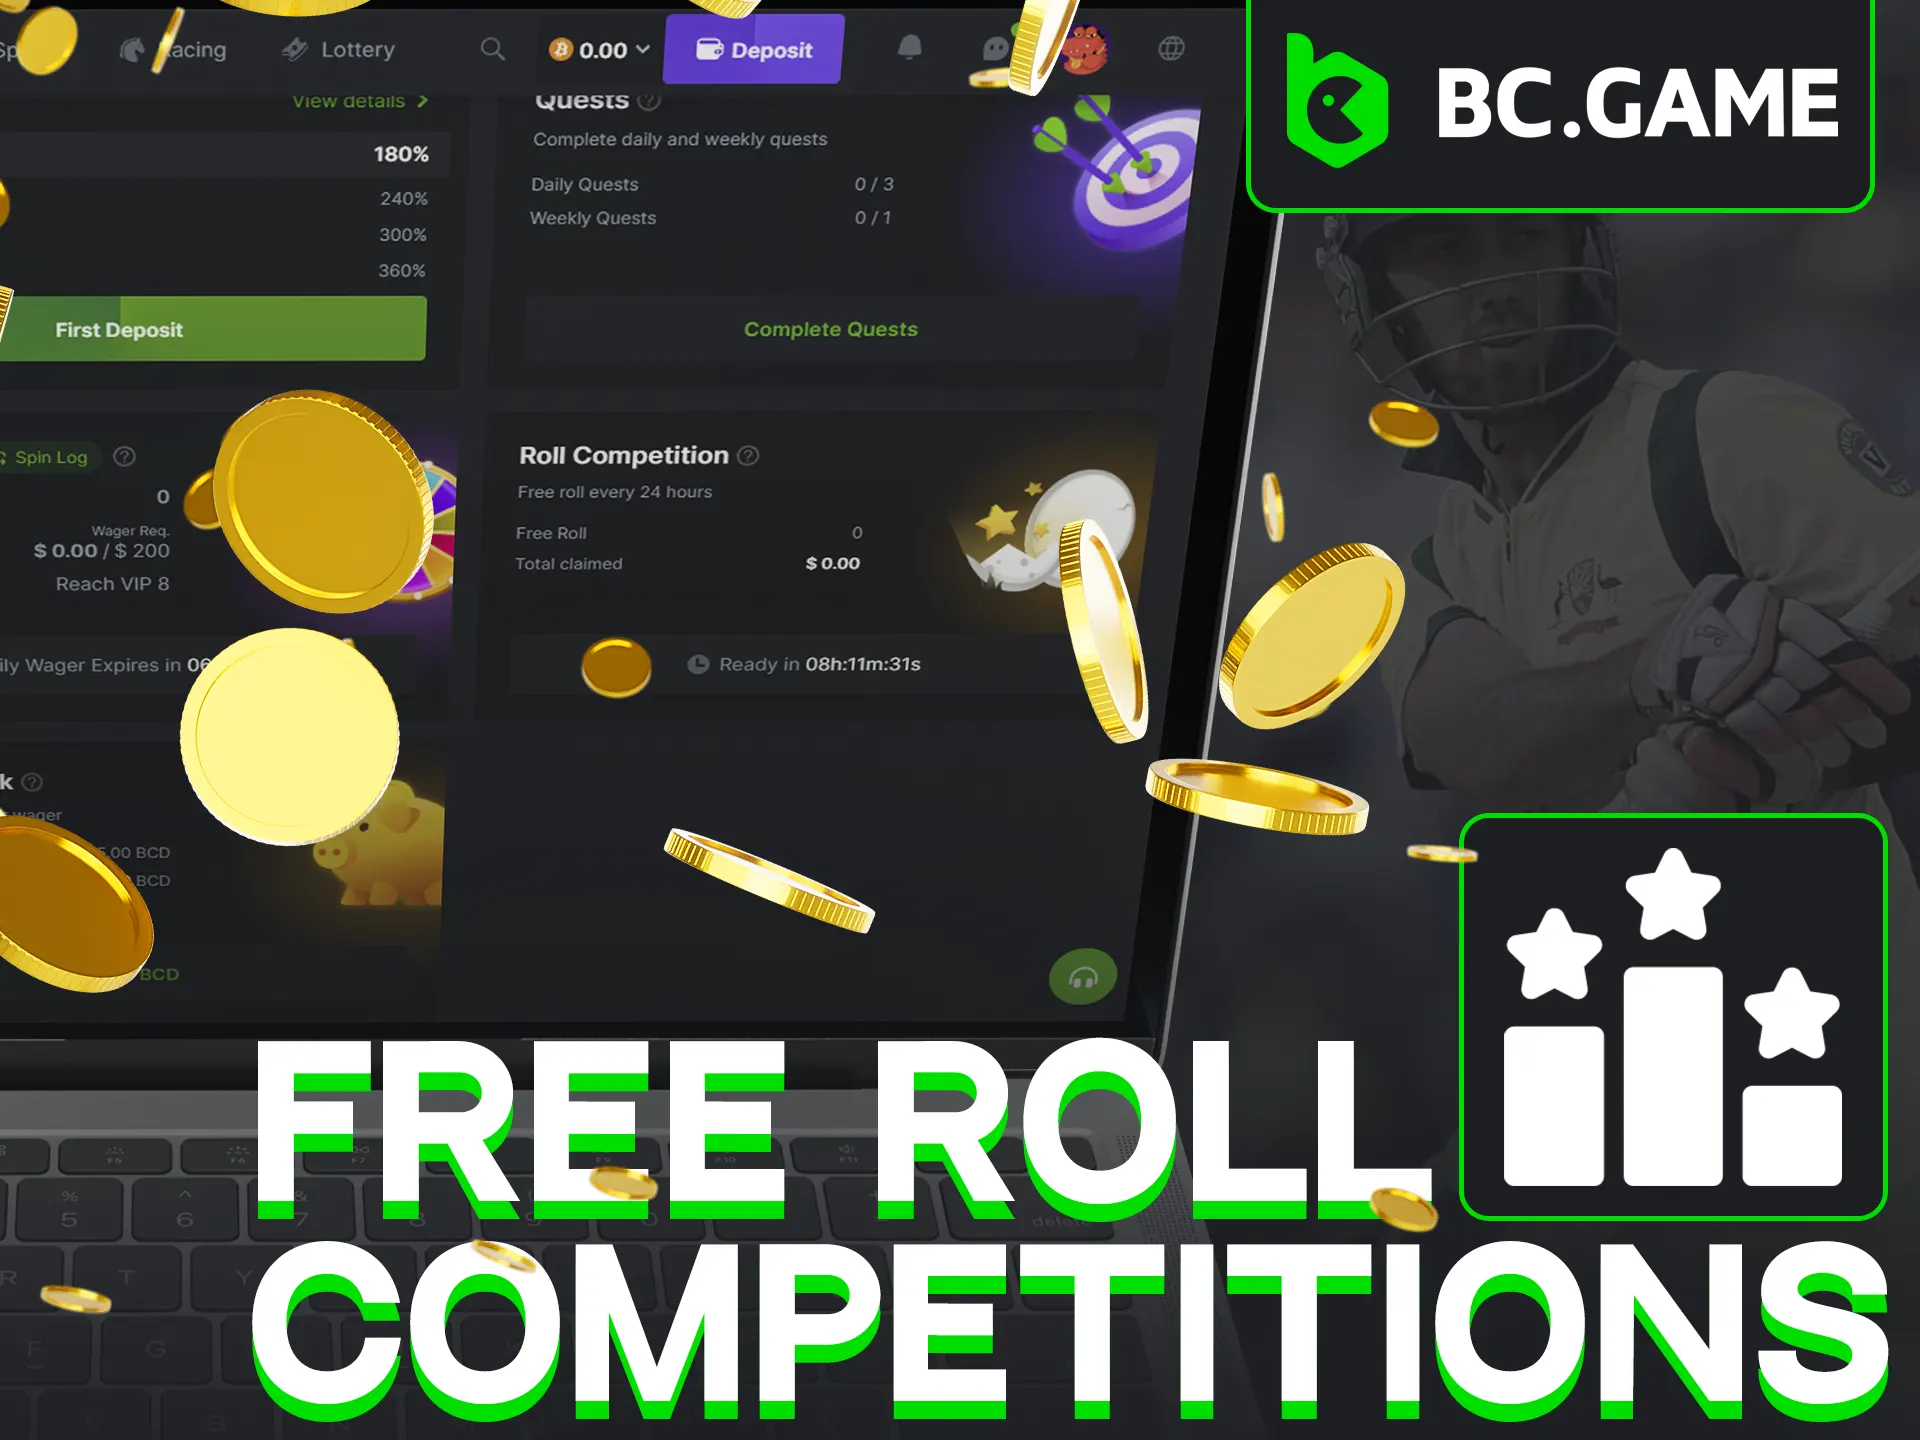 Participate in free roll competitions, and win money at BC Game.